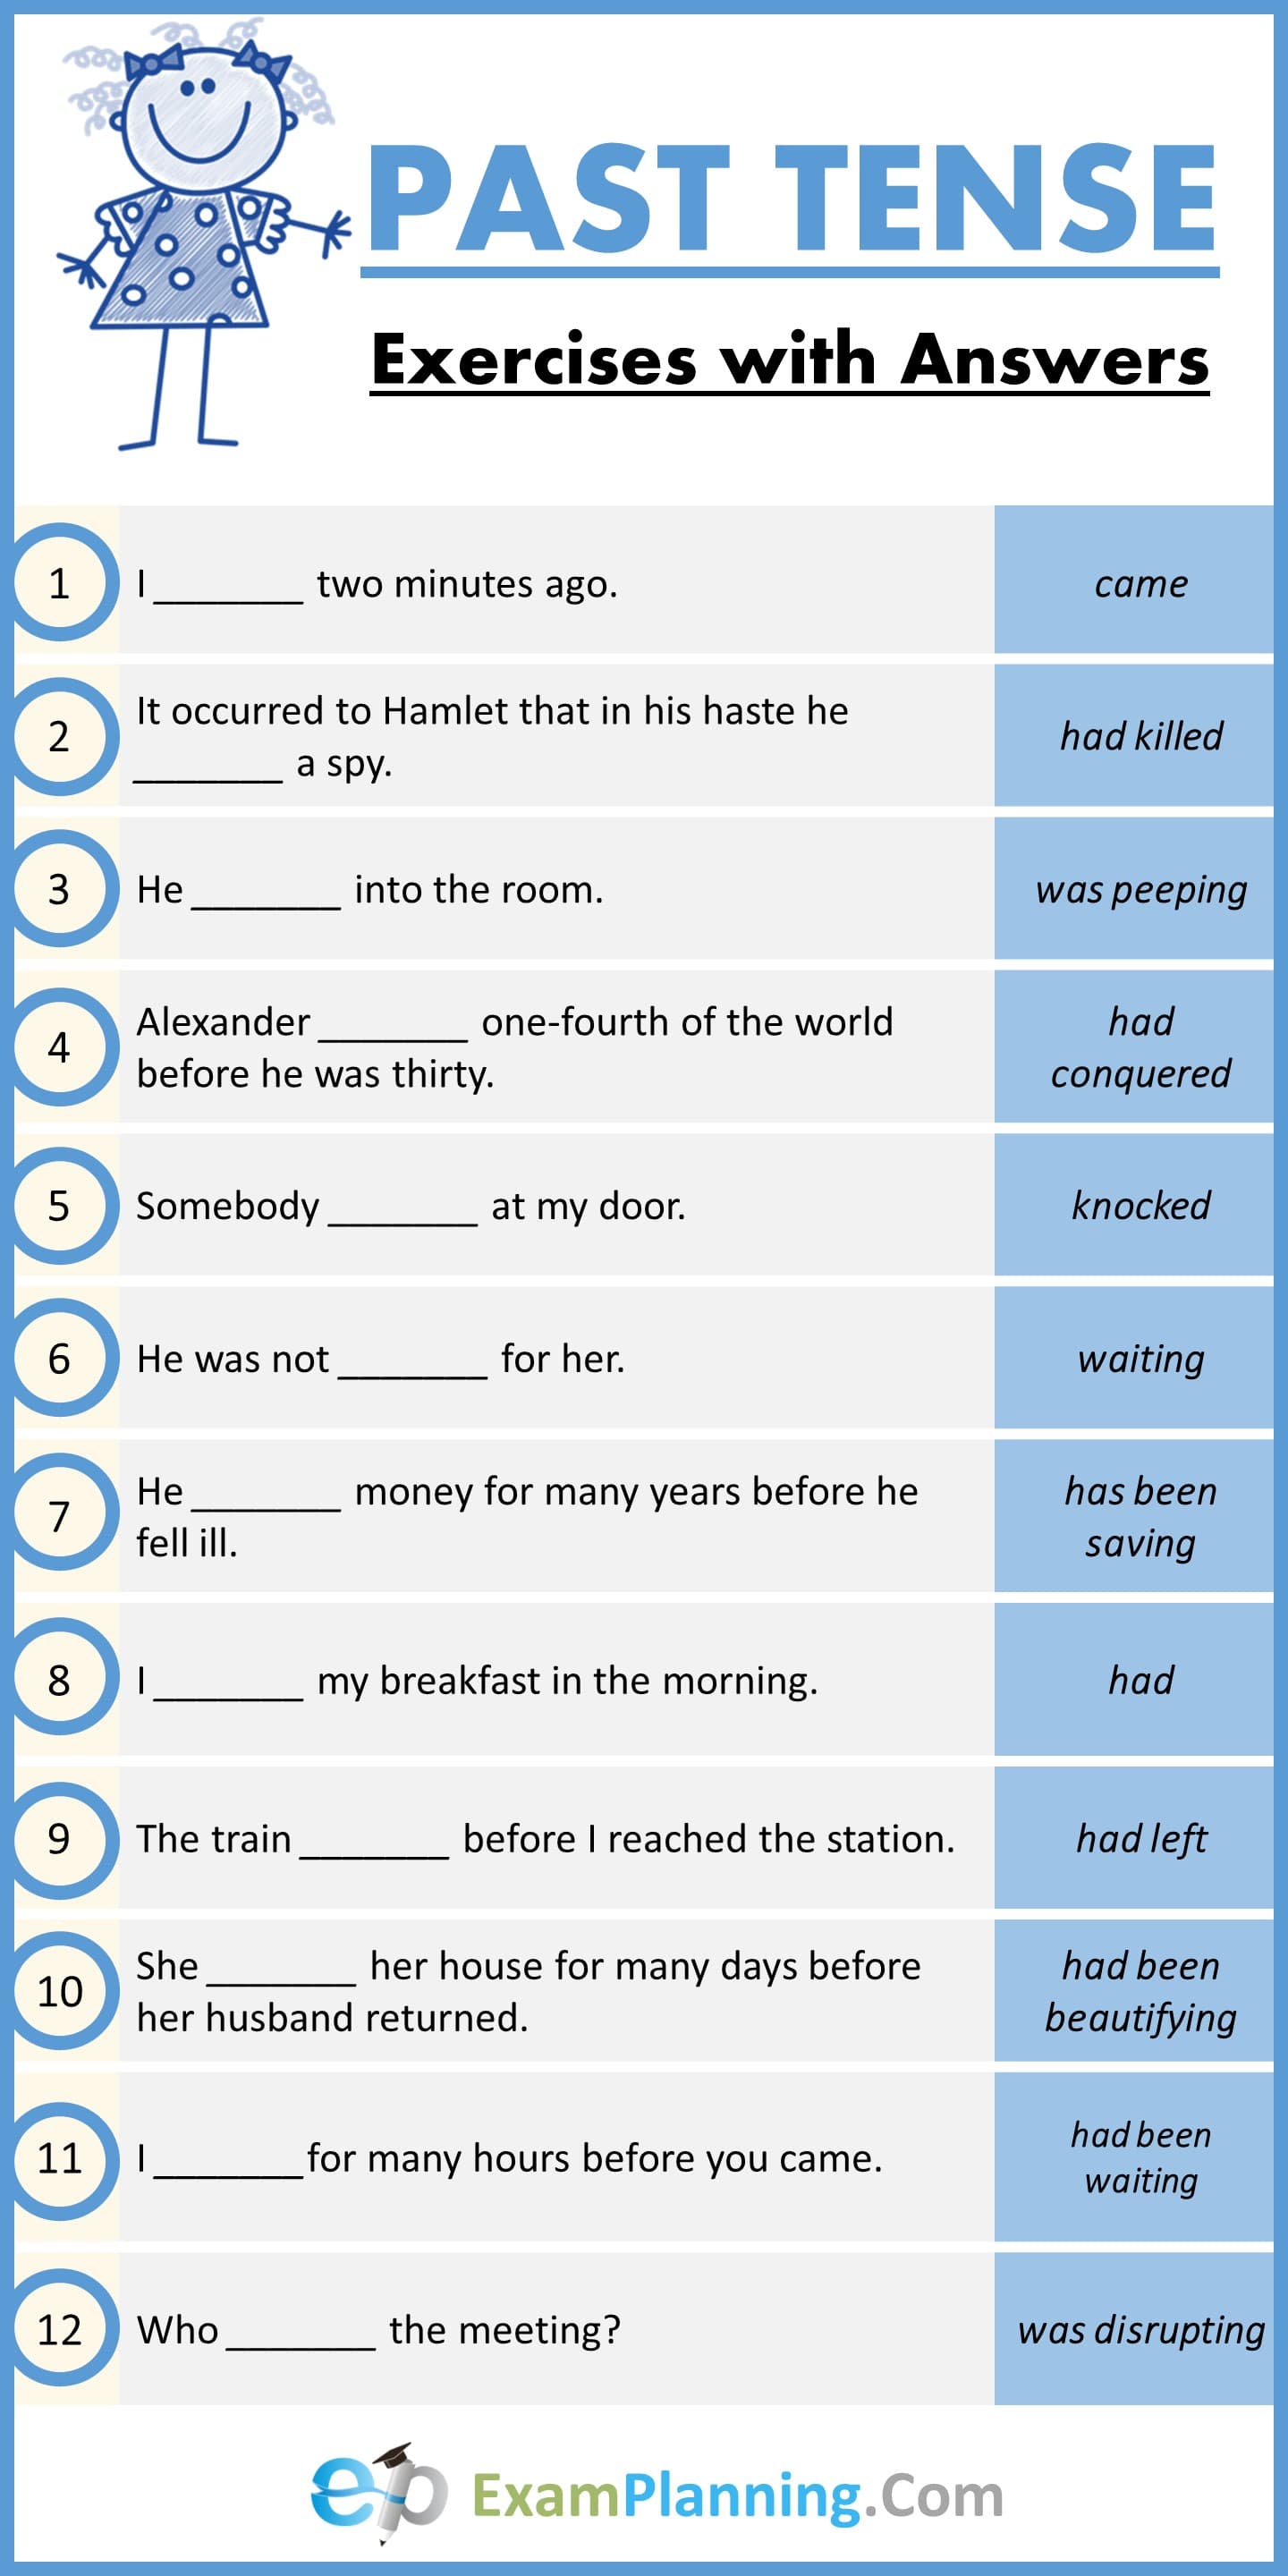 Simple Past Tense Exercises Examplanning Simple Past Tense Images And 